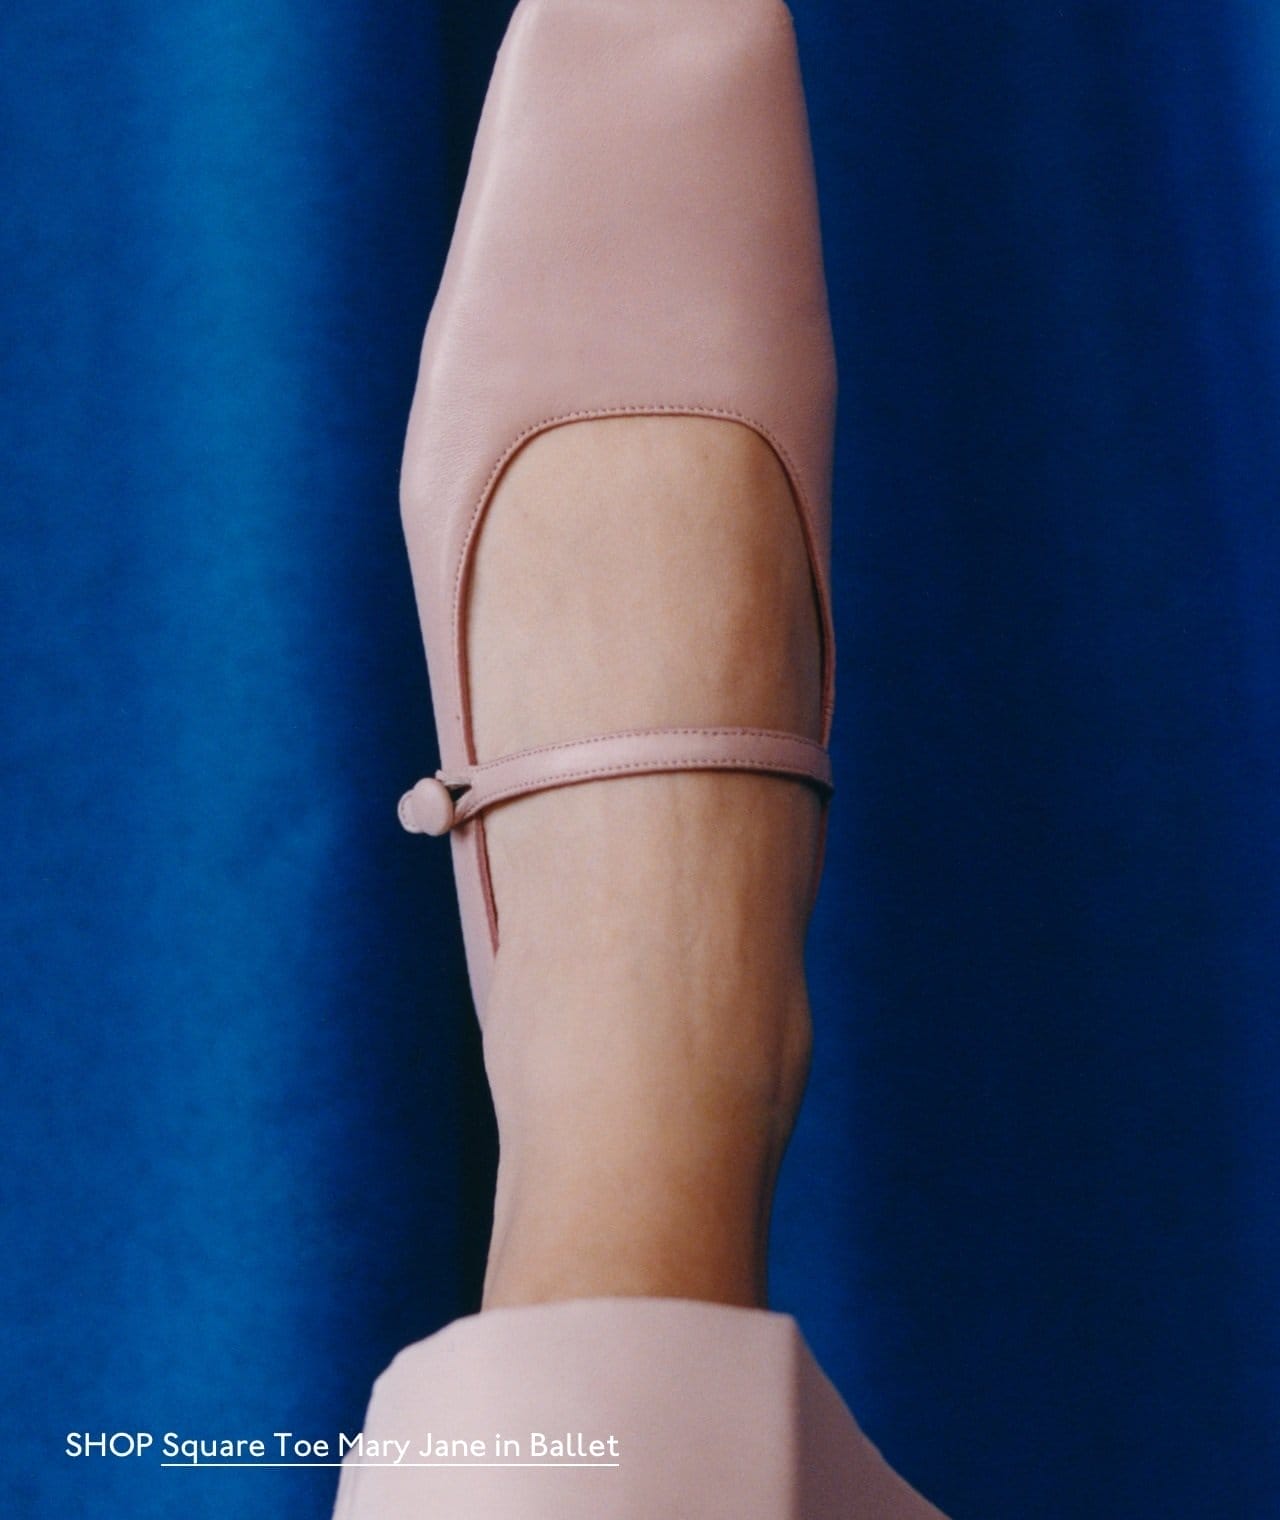 A Modern Classic. Shop our Square Toe Mary Jane in three colors, available exclusively on mansurgavriel.com. Pictured: Square Toe Mary Jane in Ballet.